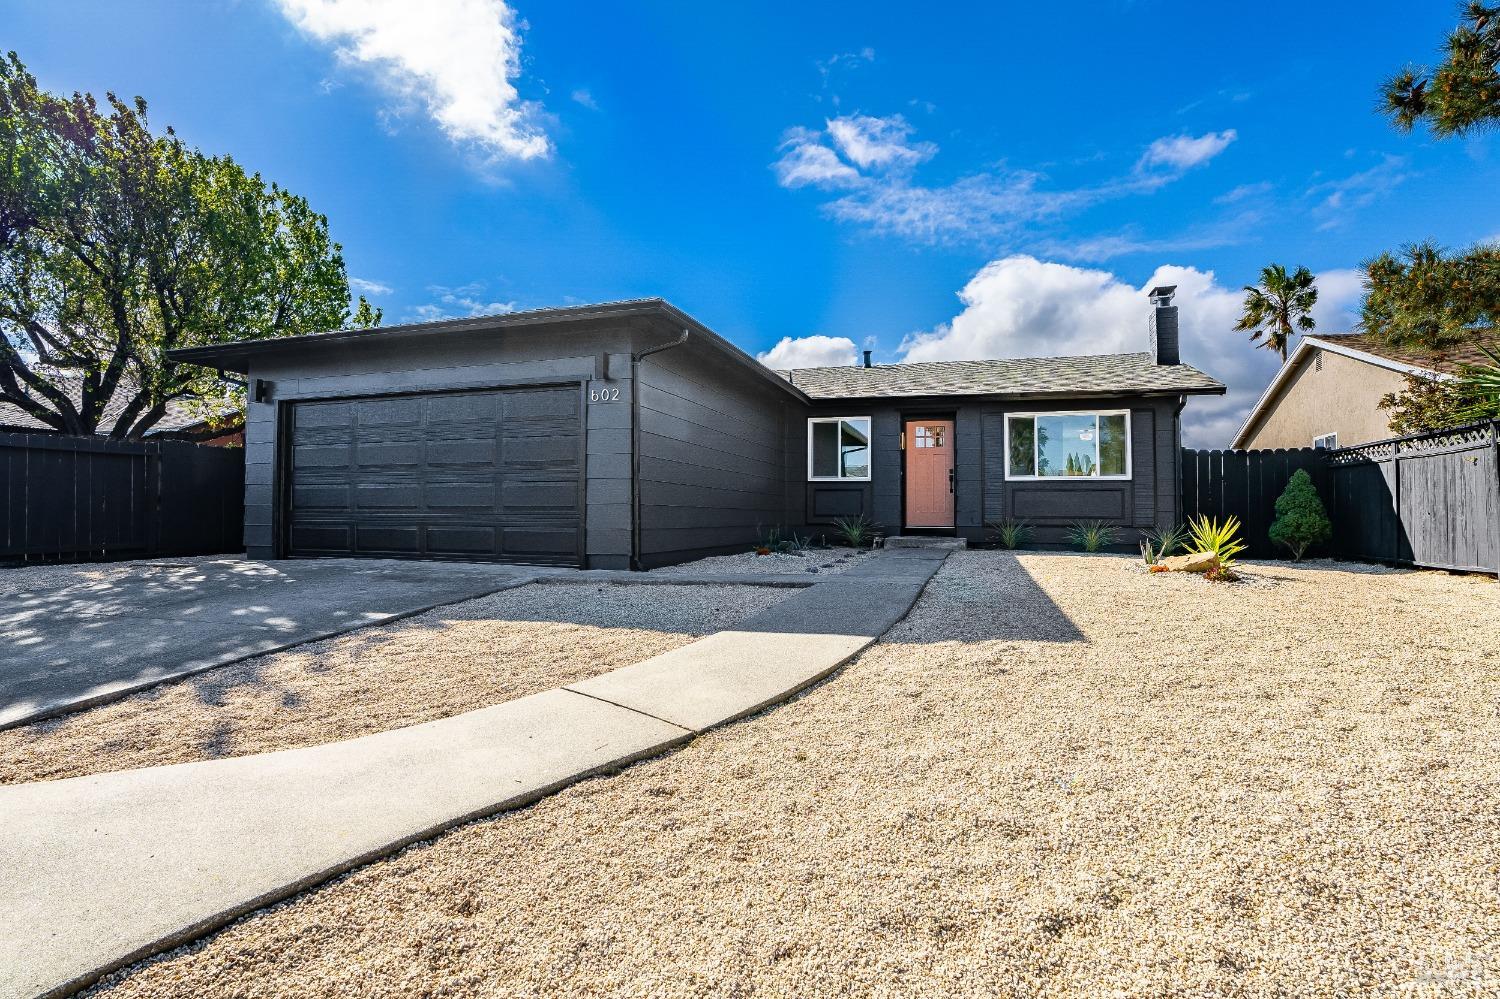 Photo of 602 Wigeon Wy in Suisun City, CA